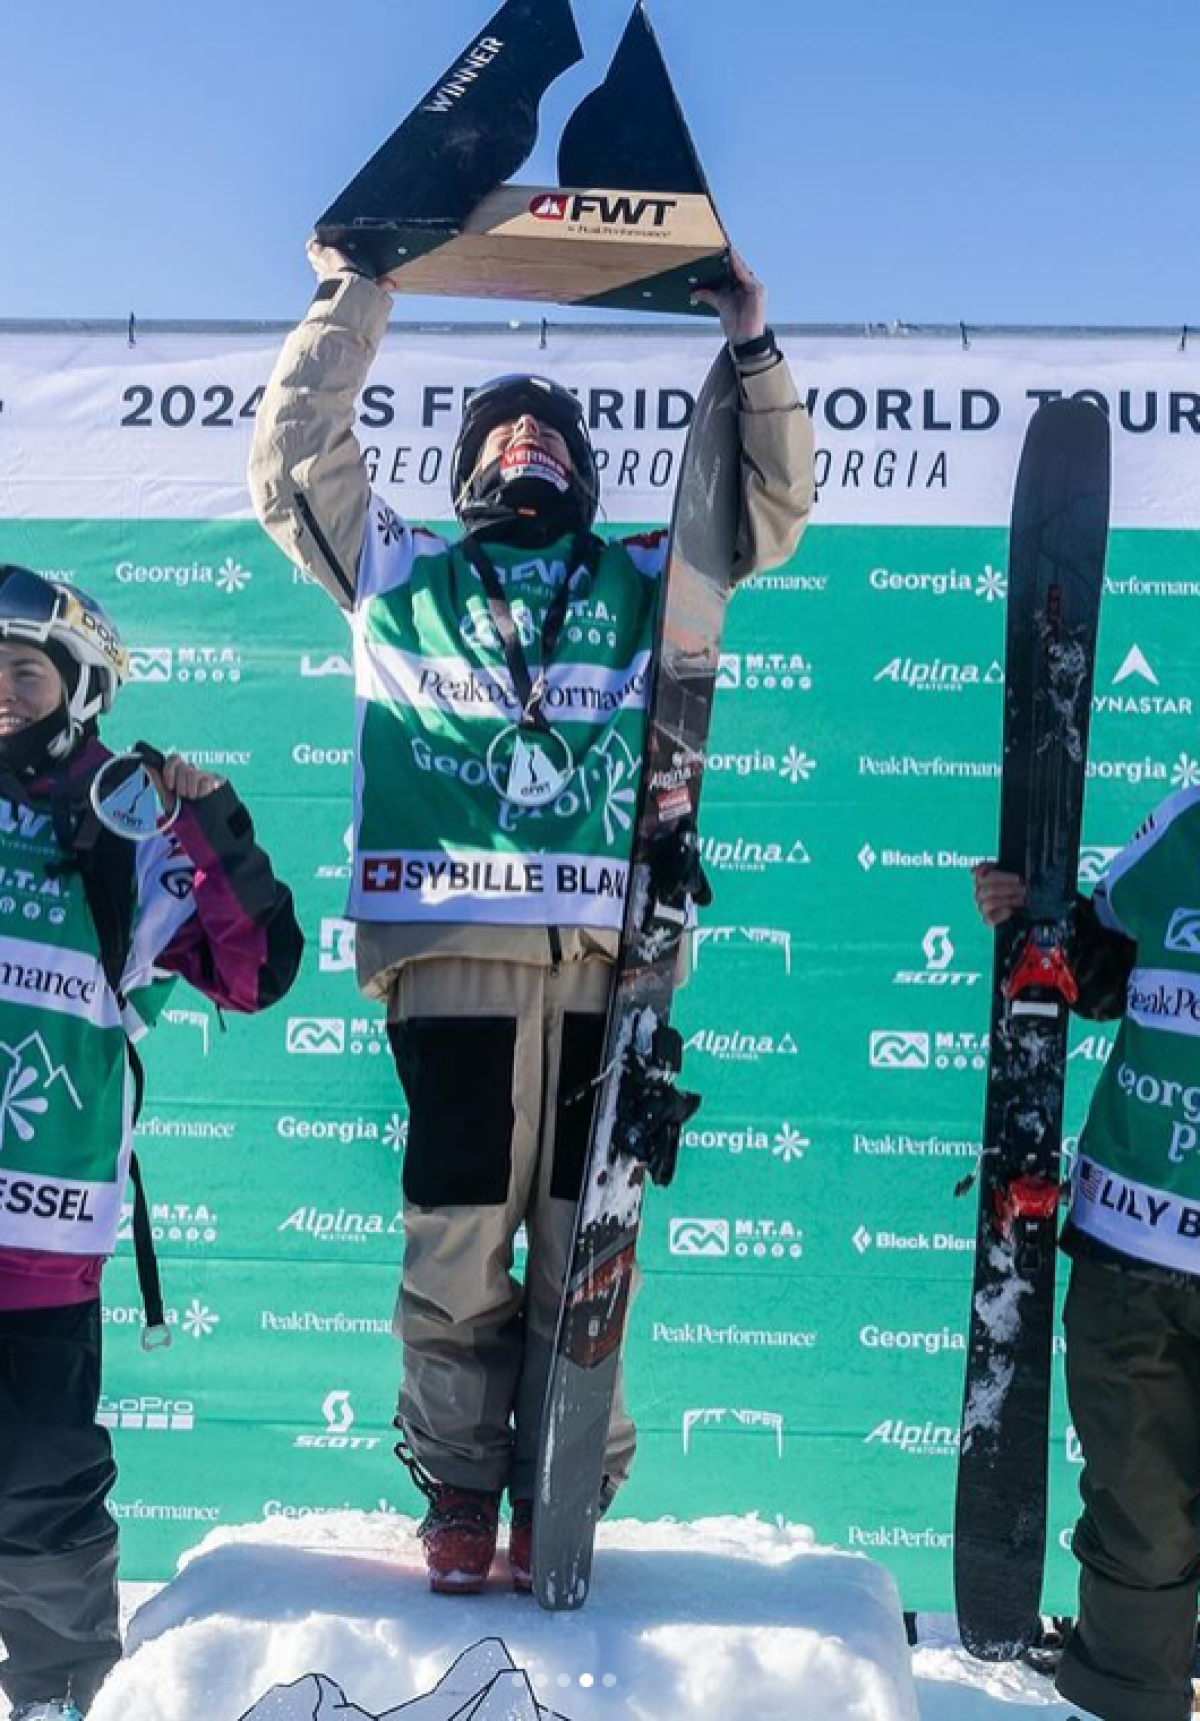 Sybille wins the GEORGIA PRO of the FWT